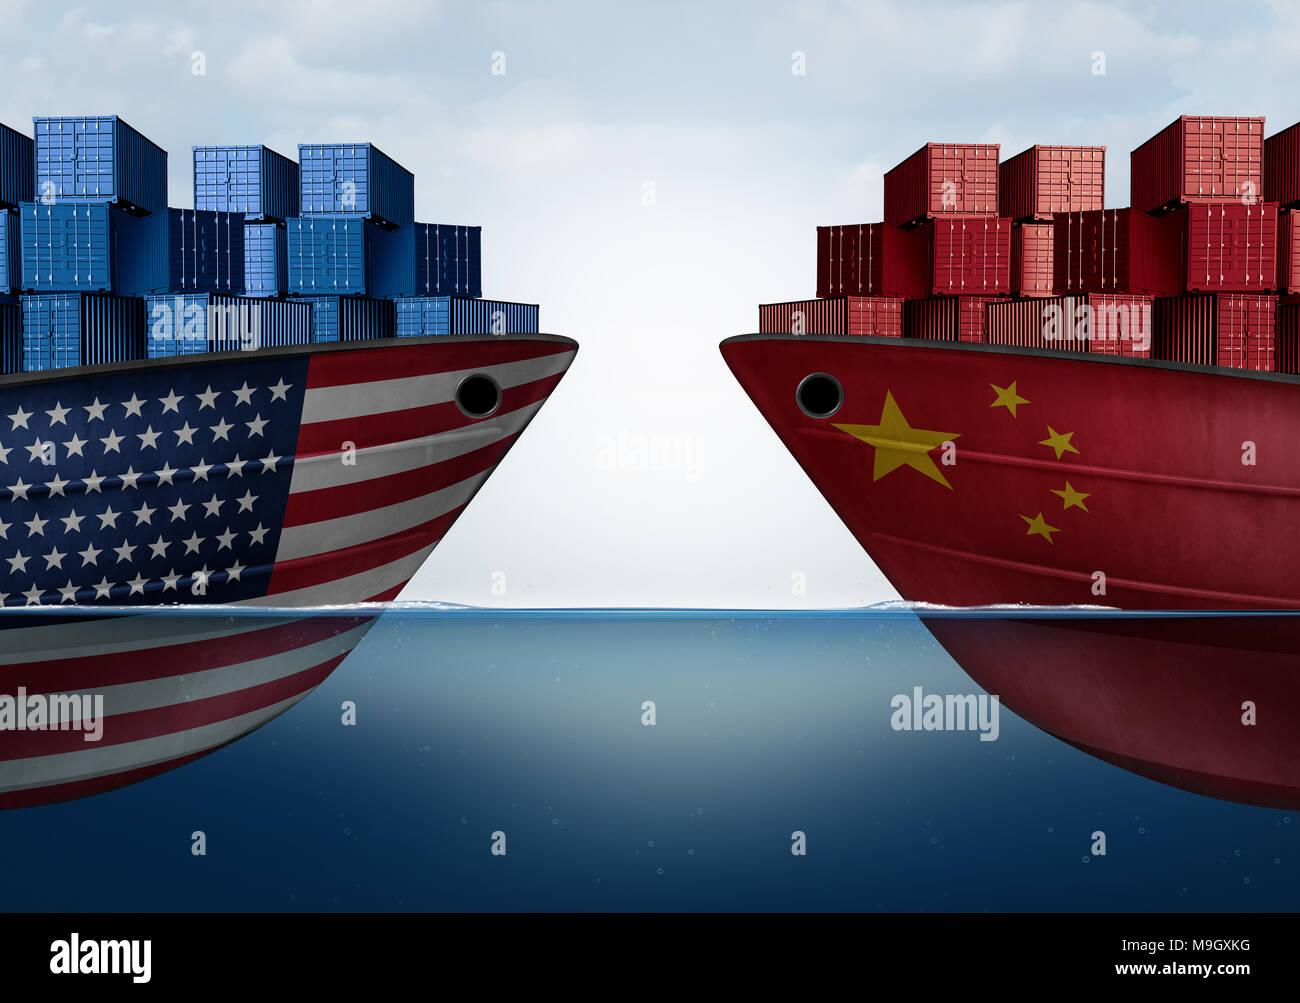 China United States trade and American tariffs as two opposing cargo ships as an economic  taxation dispute over import and exports concept. Stock Photo